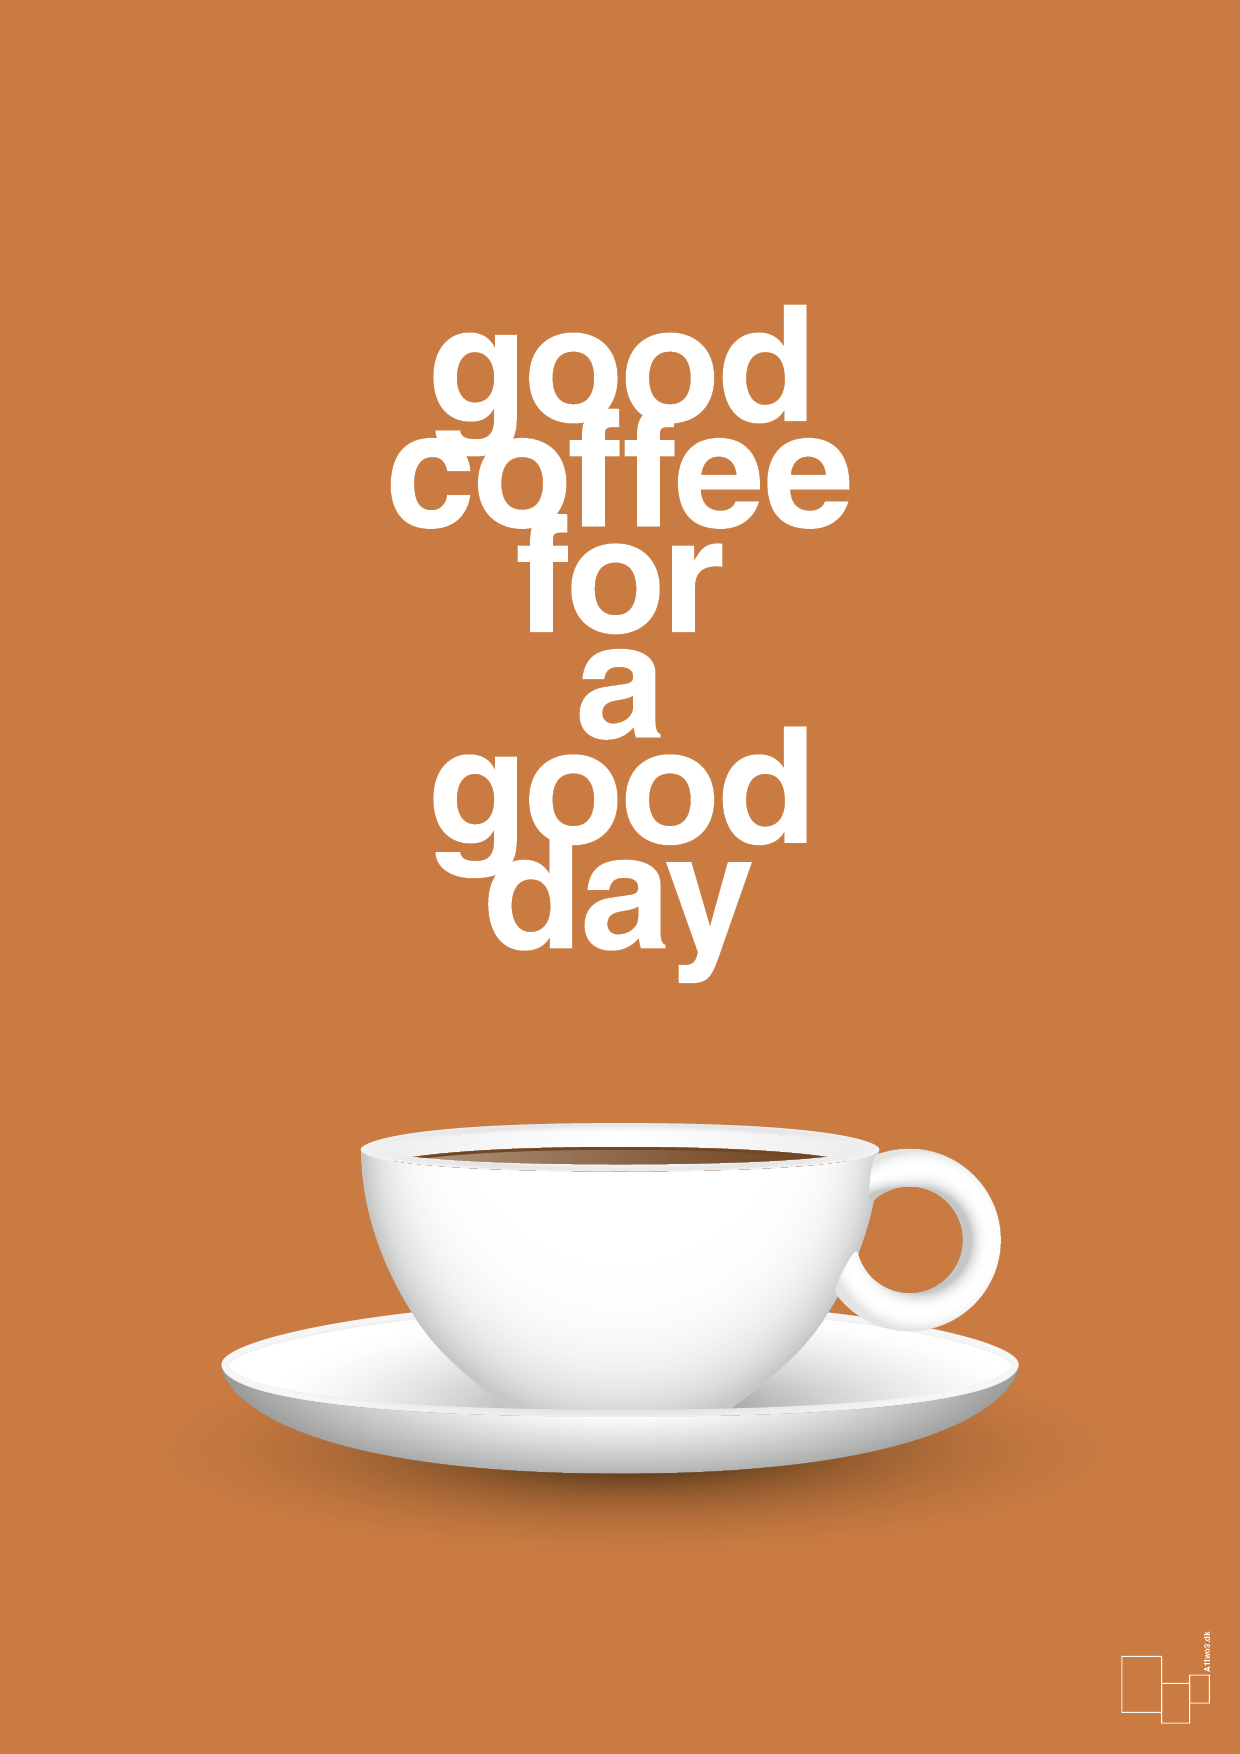 good coffee for a good day - Plakat med Mad & Drikke i Rumba Orange